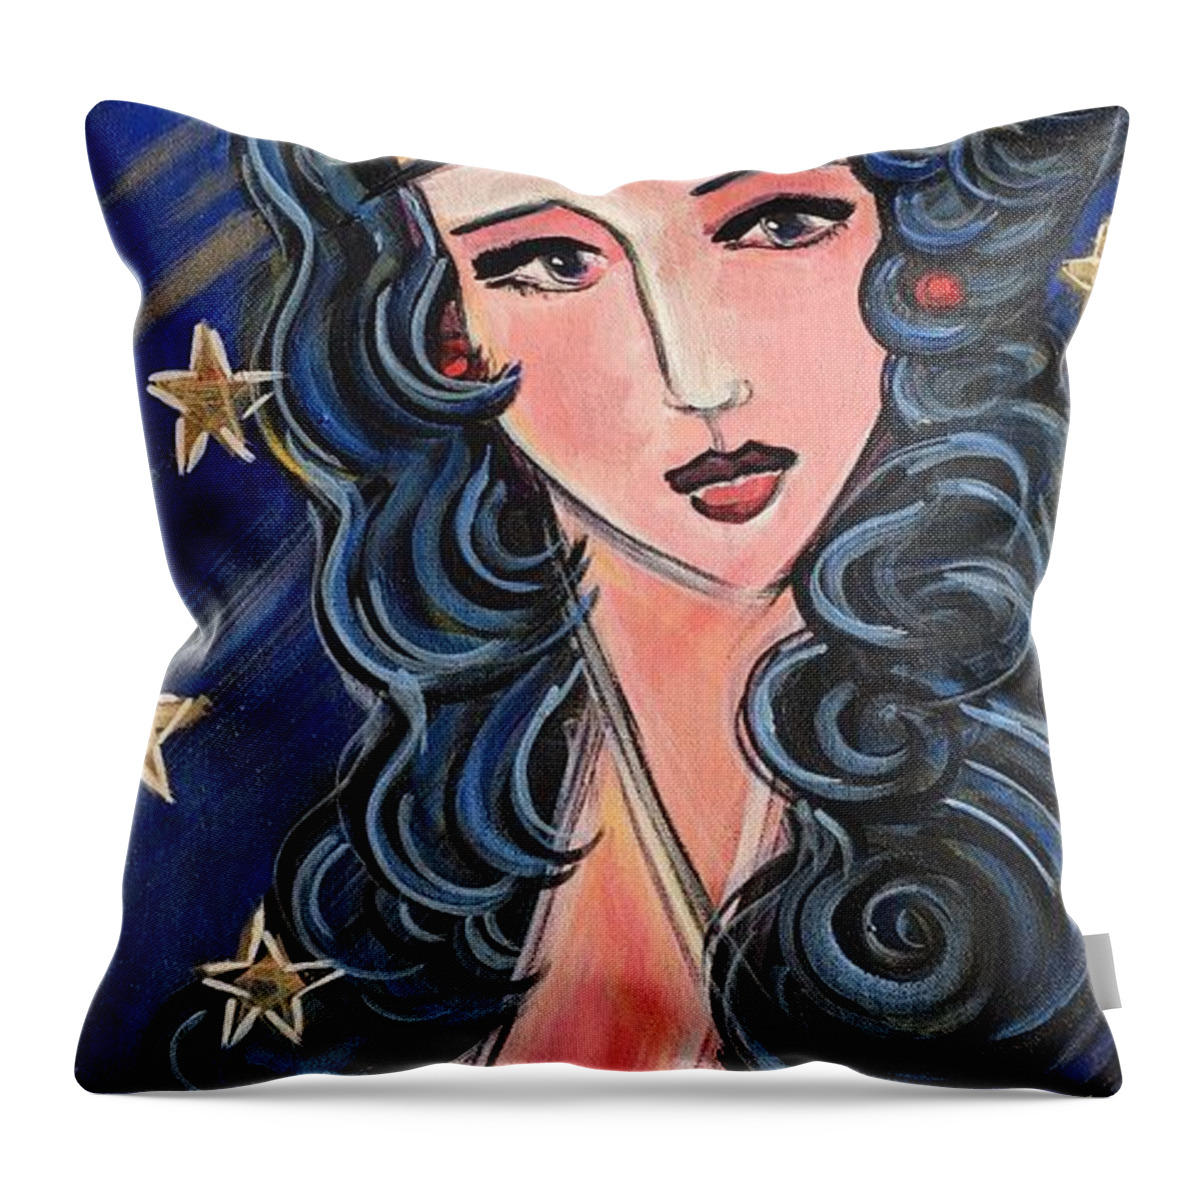 Portrait Throw Pillow featuring the painting There's a Wonder Woman in Us All by Laurie Maves ART